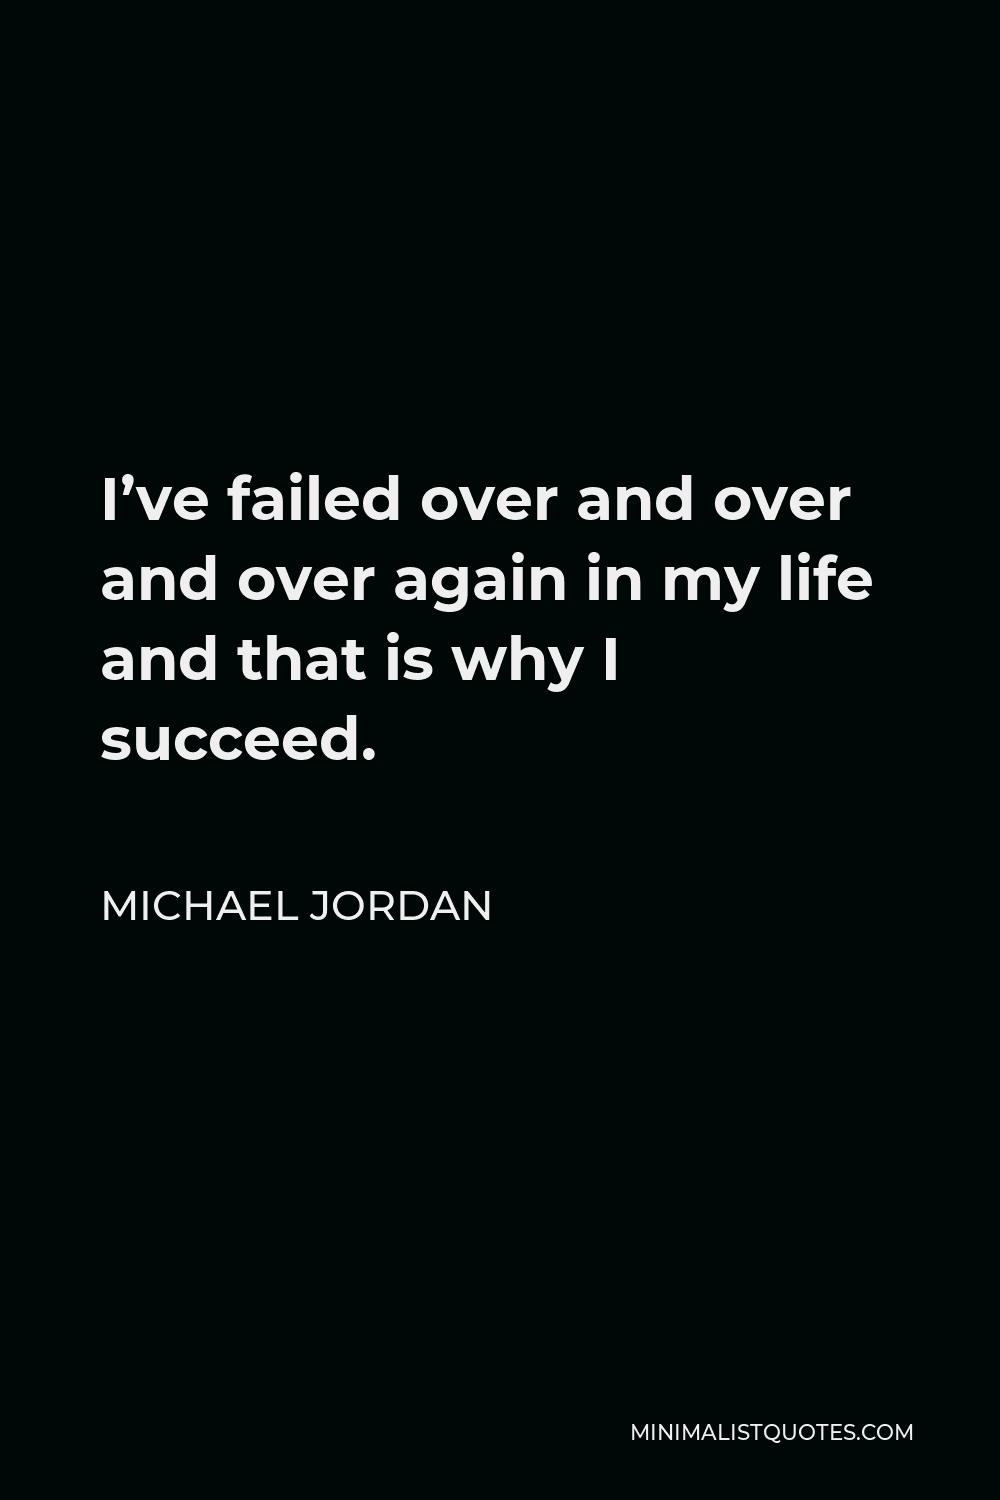 Michael Jordan Quote - I’ve failed over and over and over again in my life and that is why I succeed.